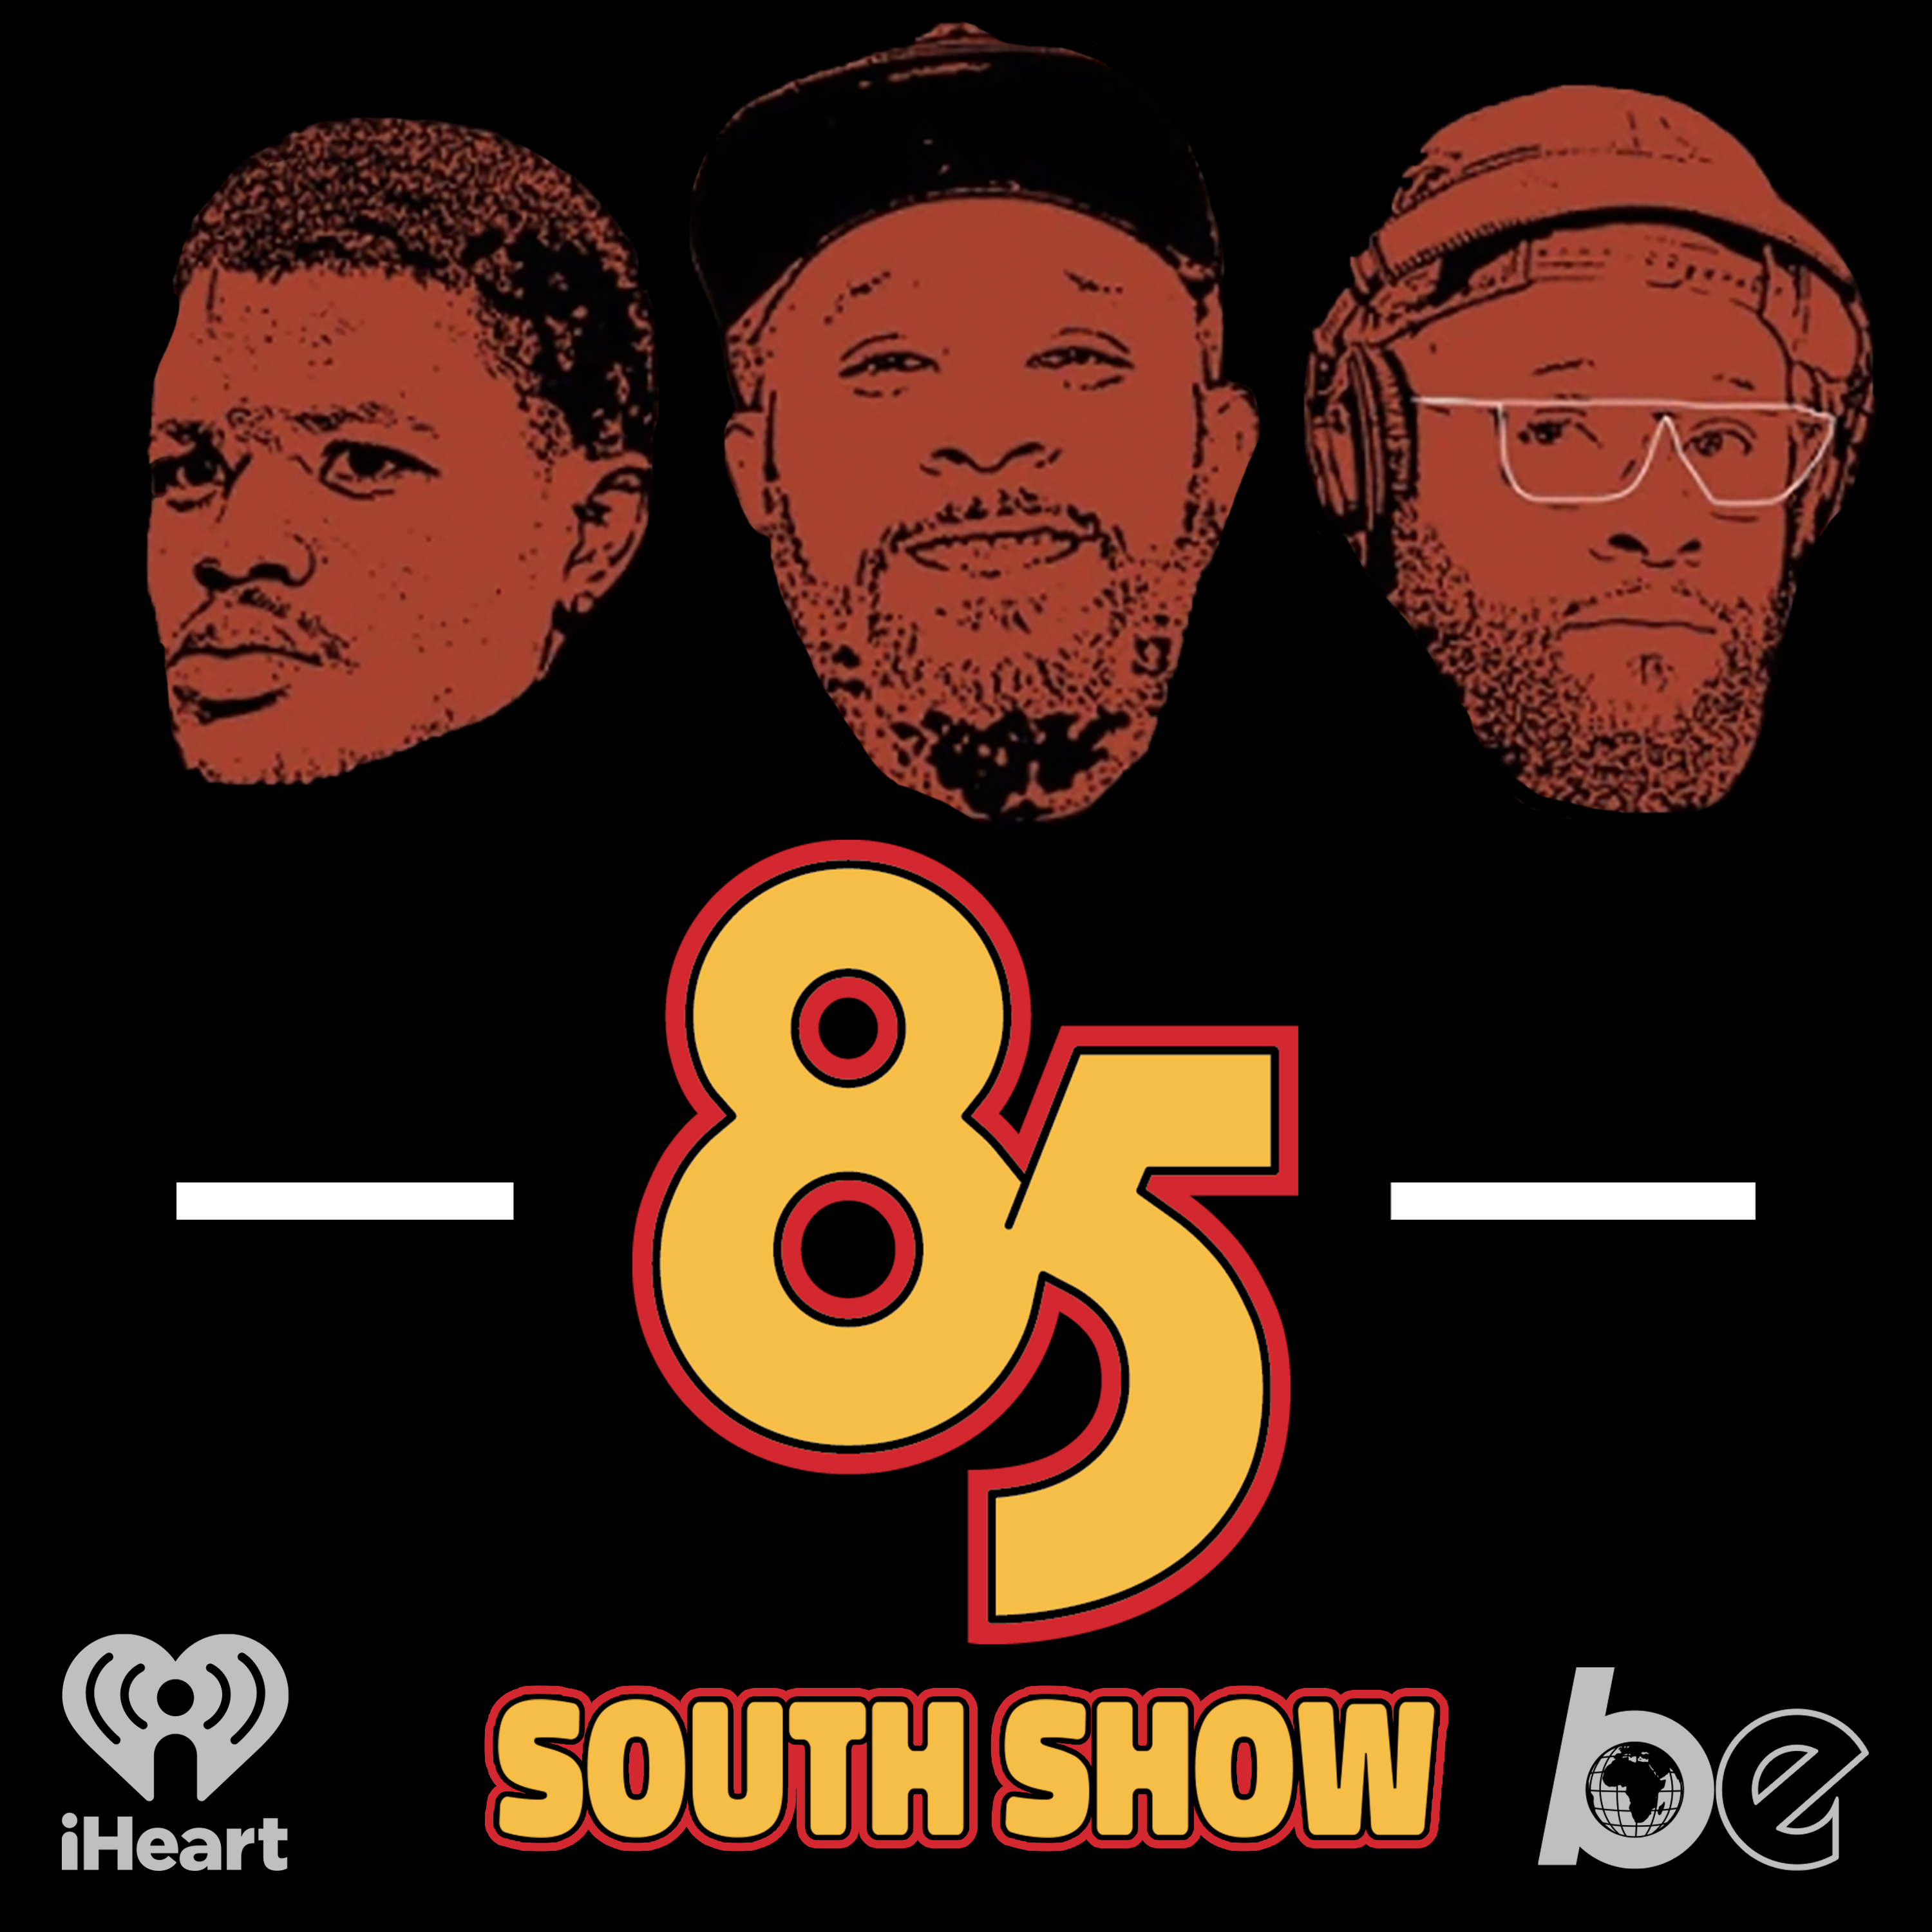 SHANNON BRIGGS in the Trap! | 85 SOUTH SHOW